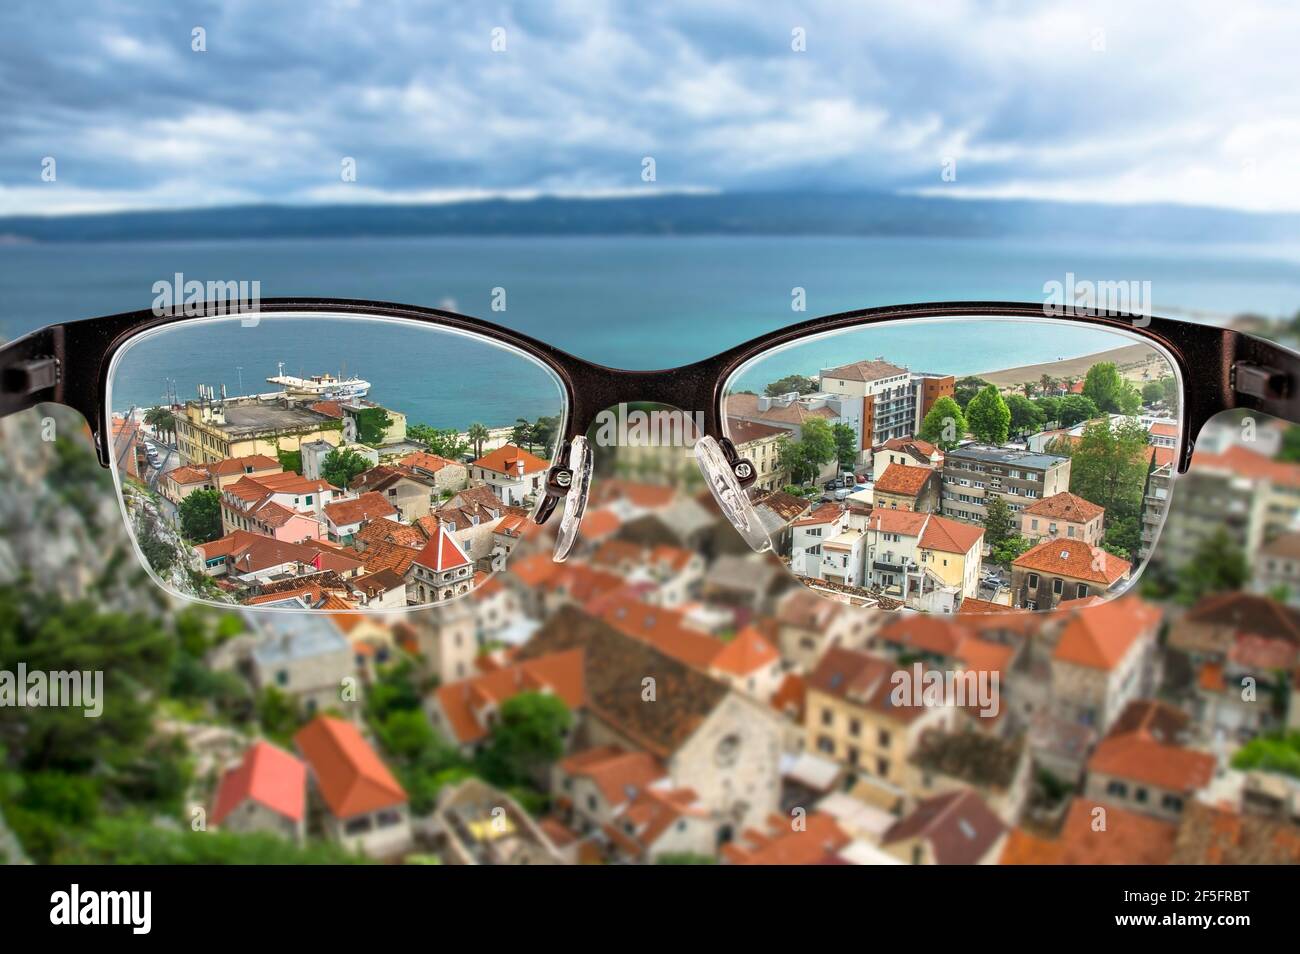 Red roofs and blue sea in Croatian city landscape focused in women's glasses frame. View through eyeglasses. Better vision concept. Stock Photo